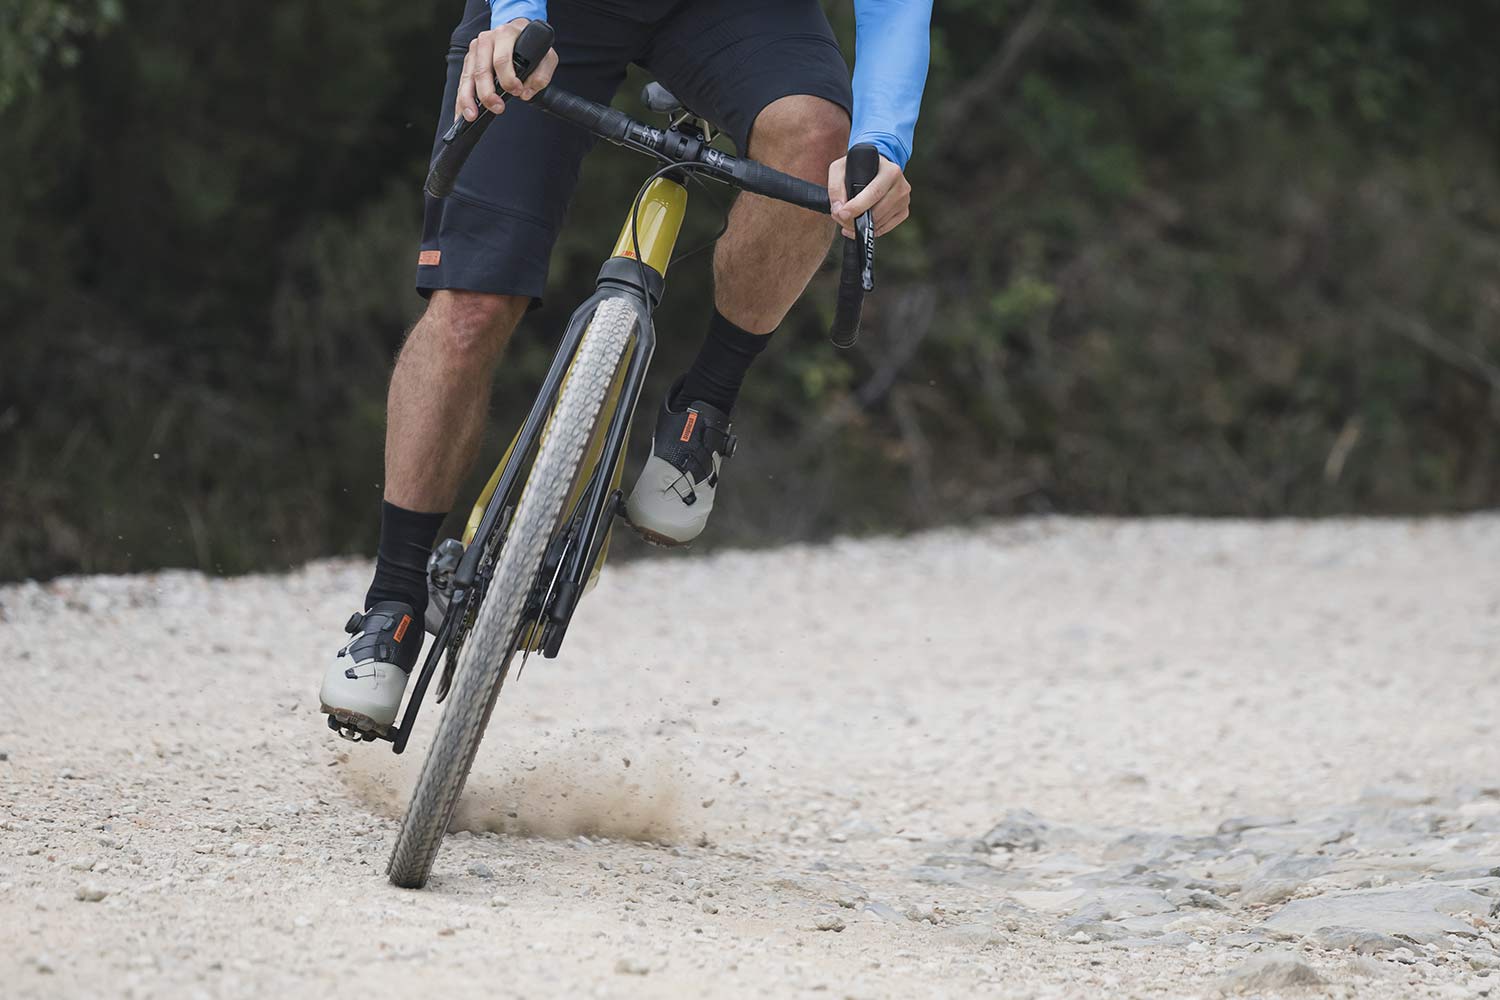 Hutchinson Tundra knobby adventure gravel tire review, photo by Roo Fowler Bike Connection Agency, lean cornering